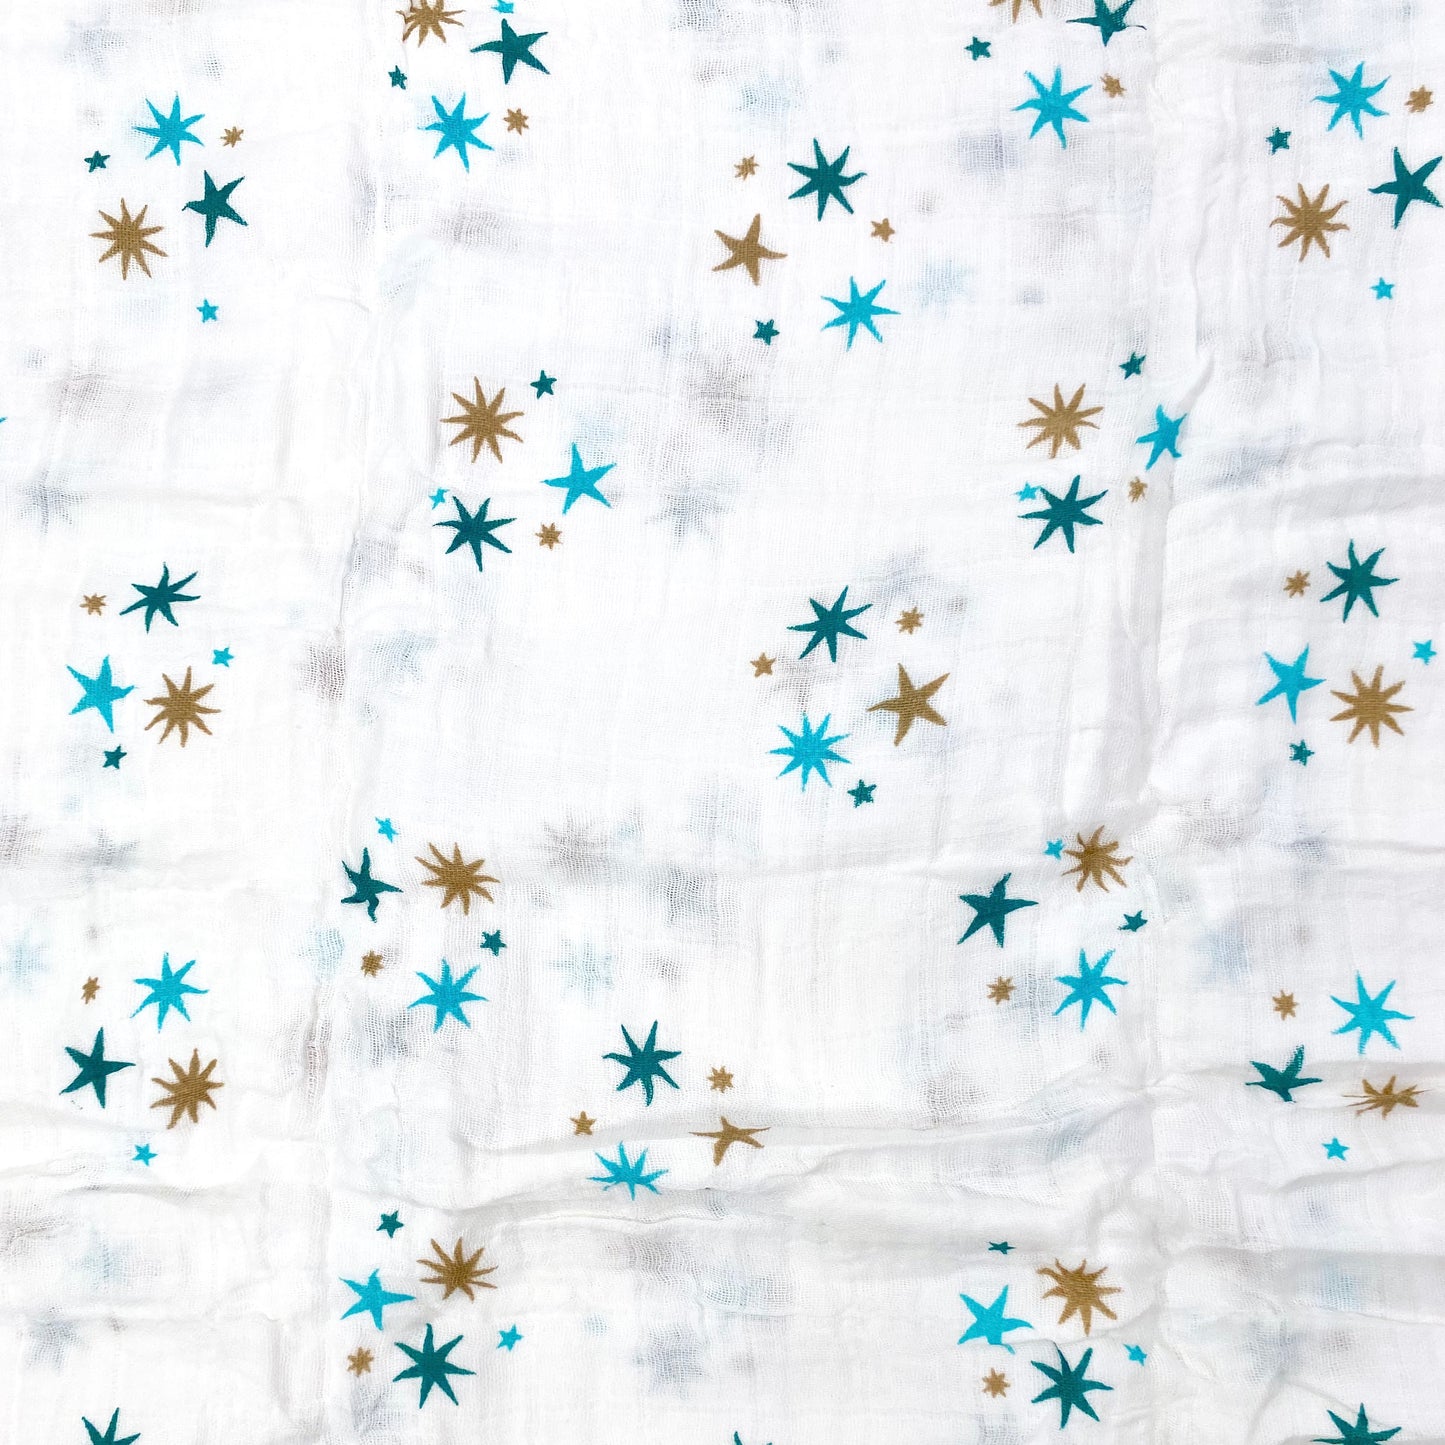 Close up pattern of a muslin swaddle blanket with a blue stars design.